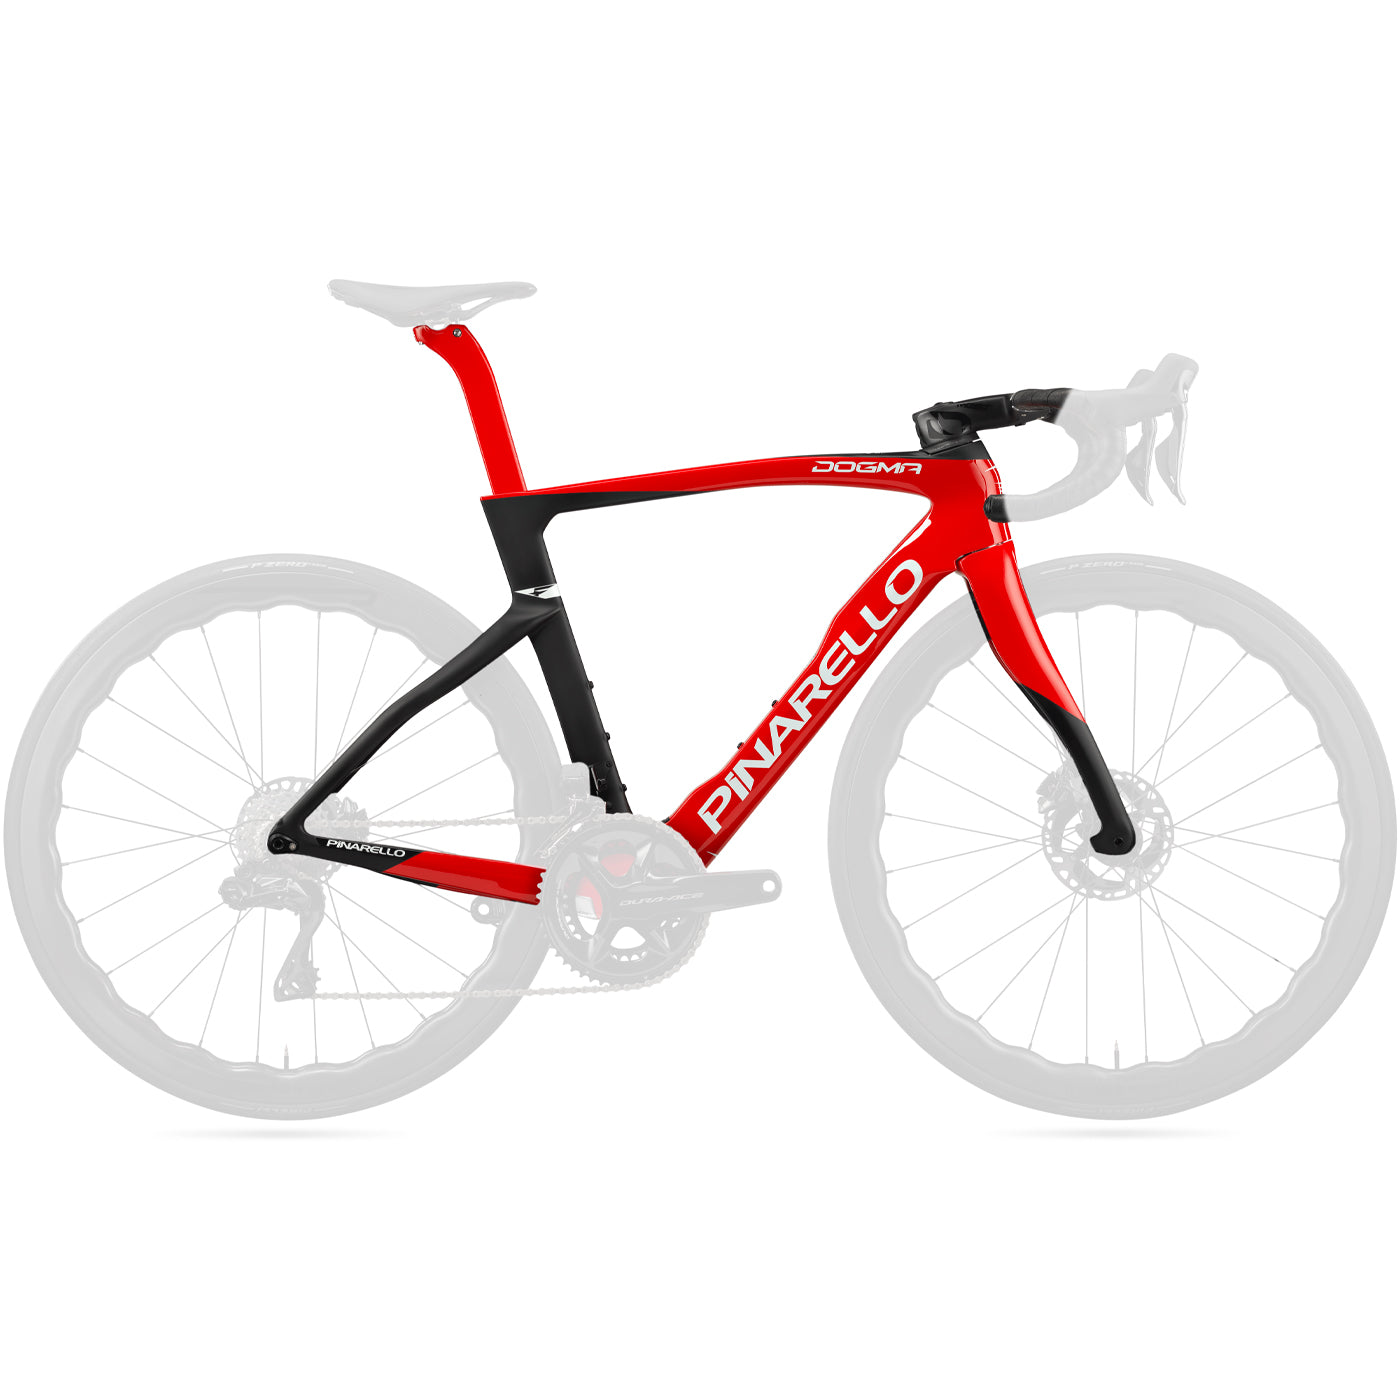 Pinarello Dogma F Disk Frameset - Black red | All4cycling